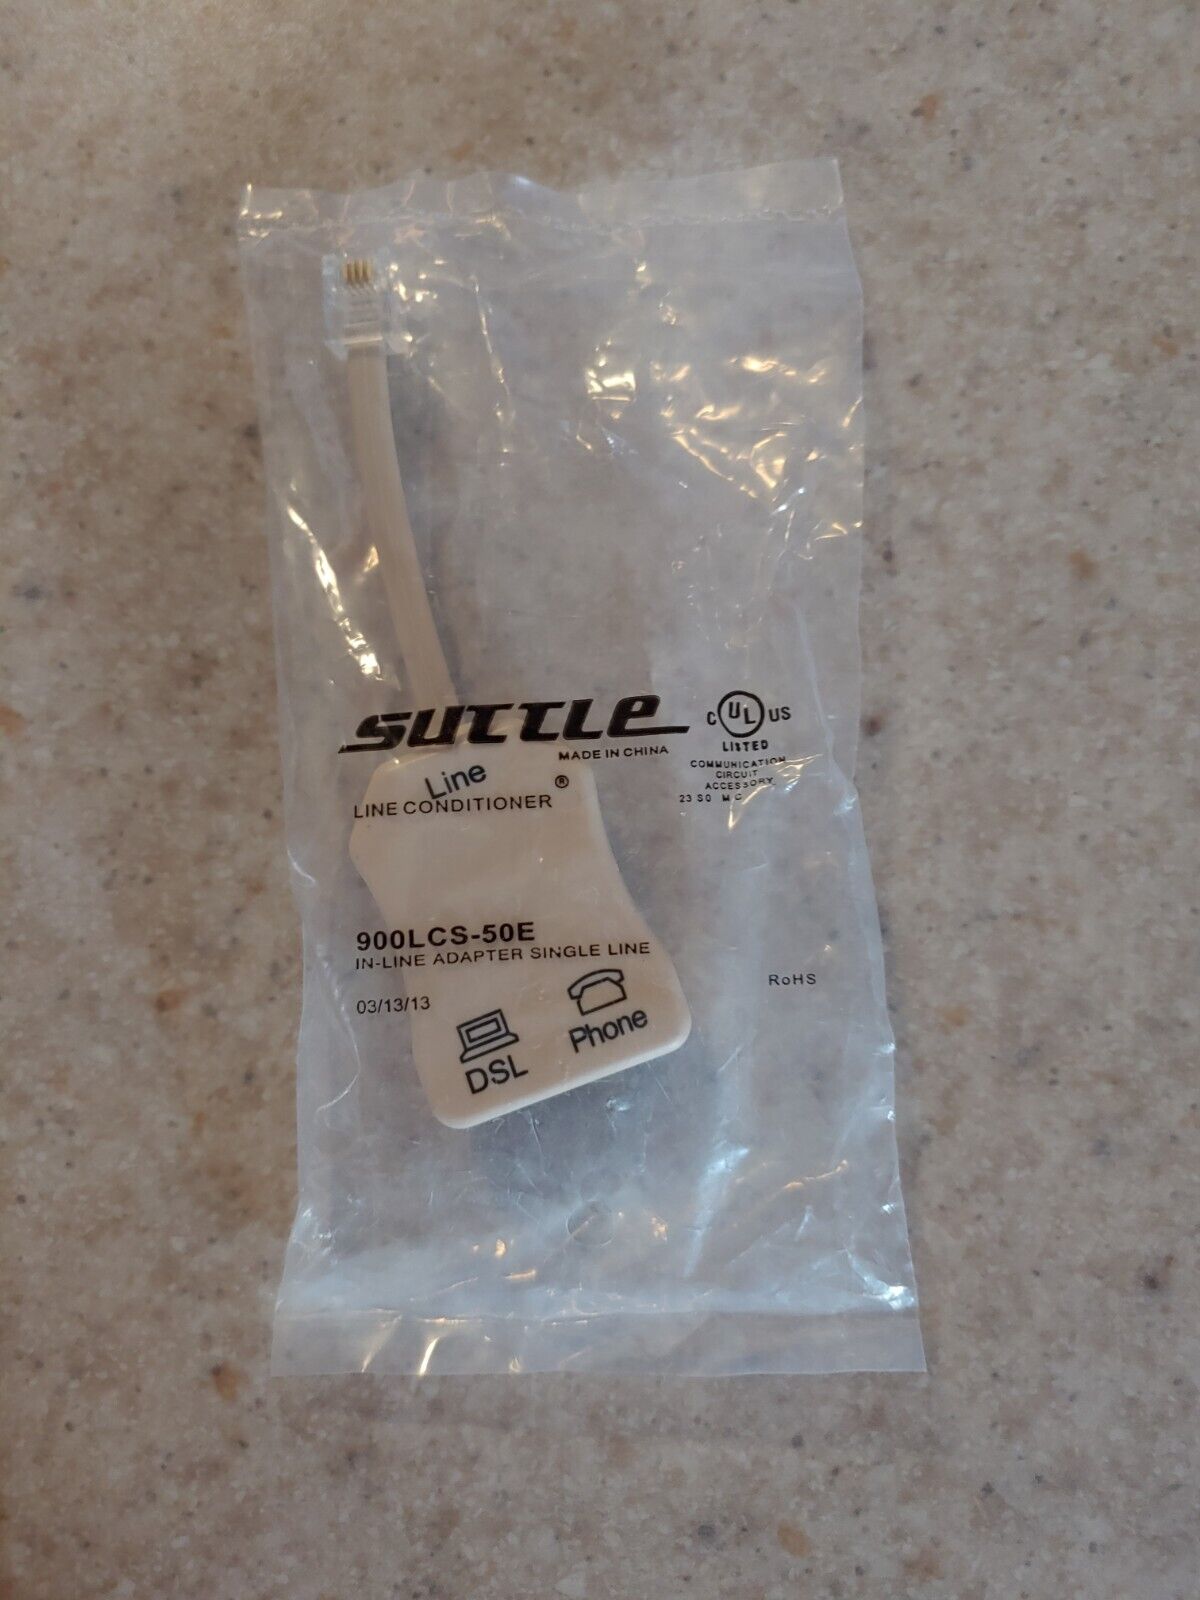 Suttle 900LCS-50E Line Conditioner Phone DSL Inline Adapter Buy More, Save More